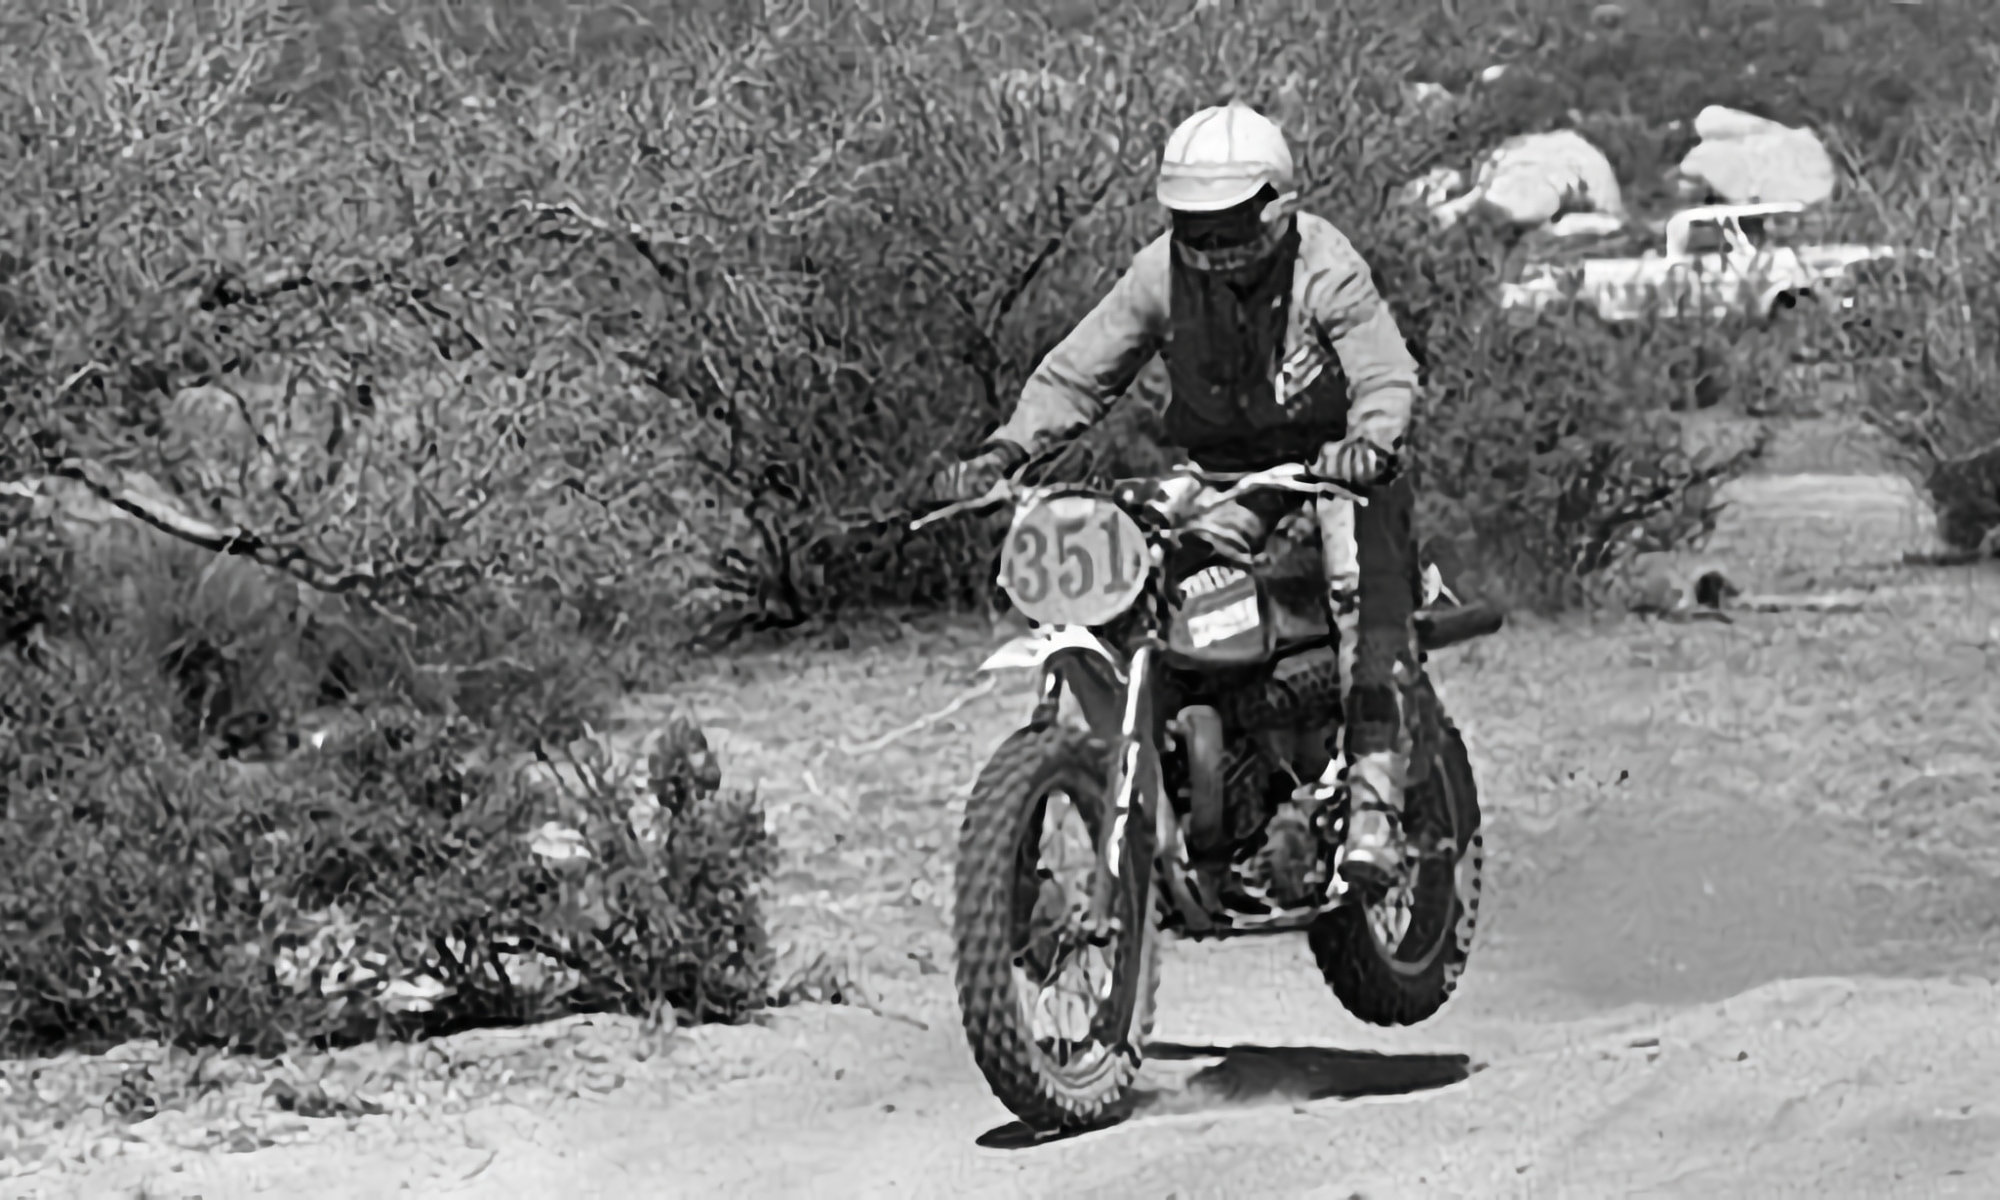 Mary McGee riding her competition motorcycle in Baja in the 1960s.